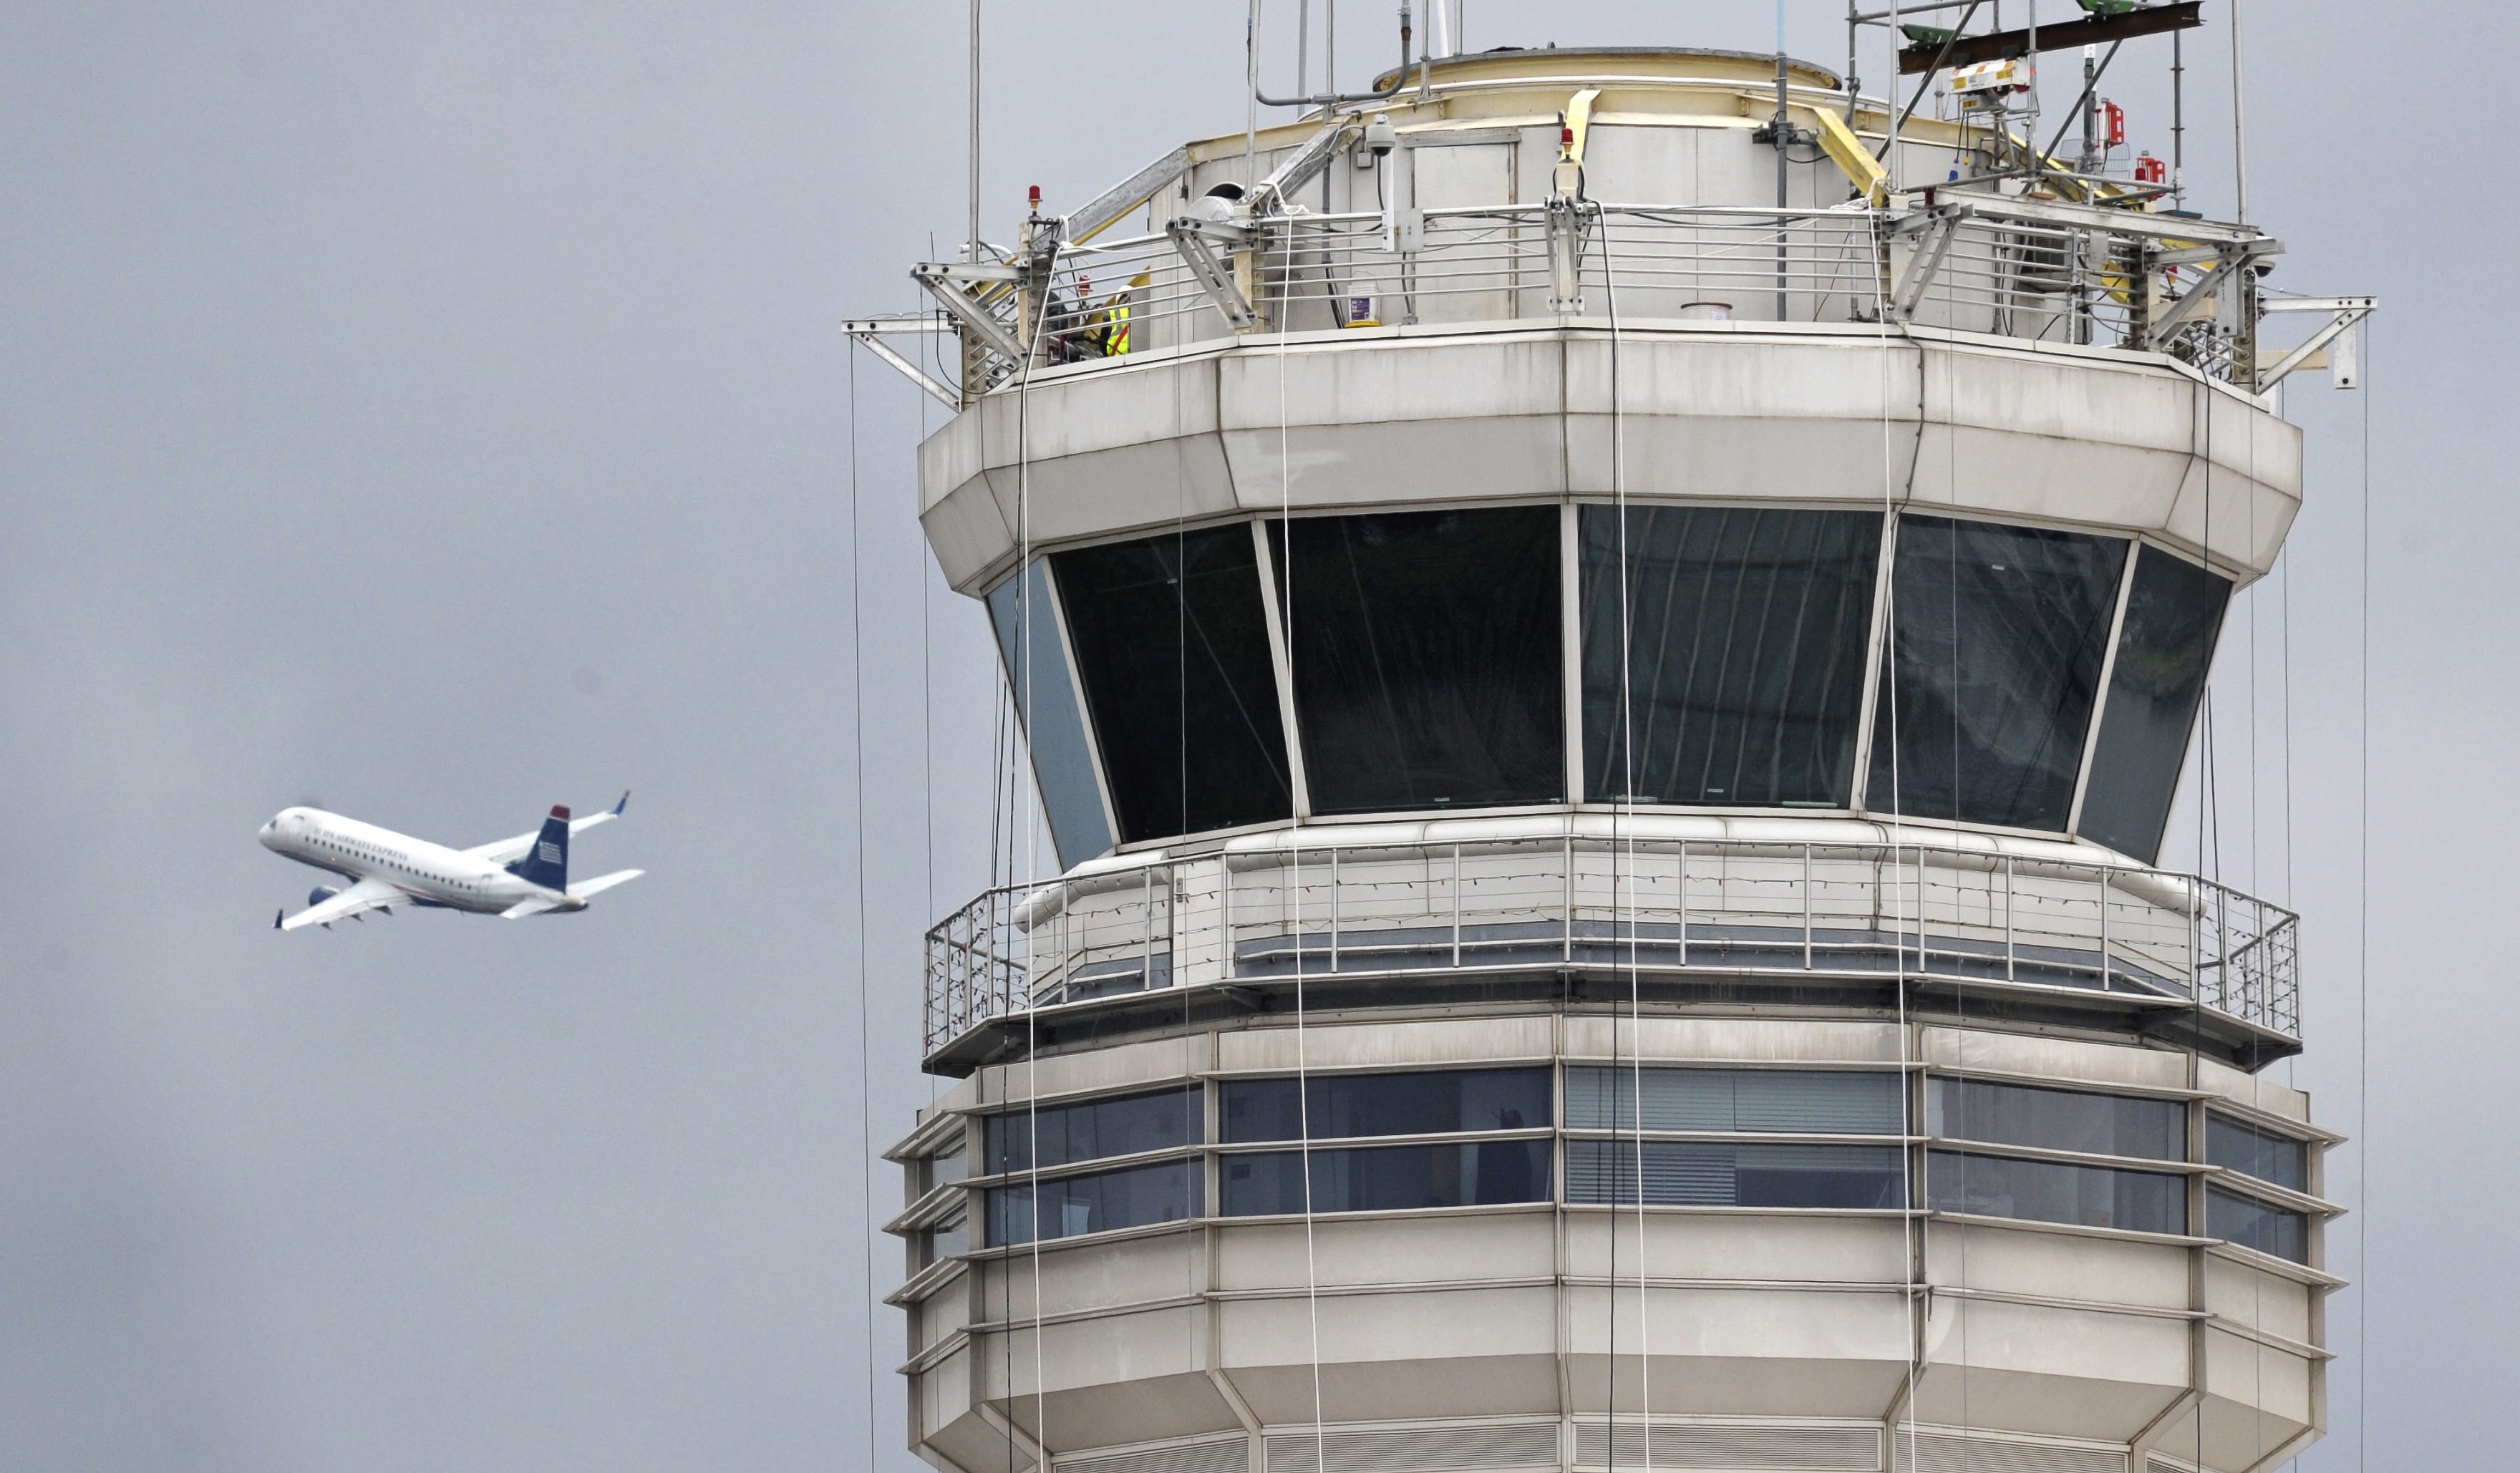 Associated Press files
A jet flies past the control tower at Washington's Ronald Reagan National Airport. Two planes landed at the airport without aid because the lone controller had fallen asleep.